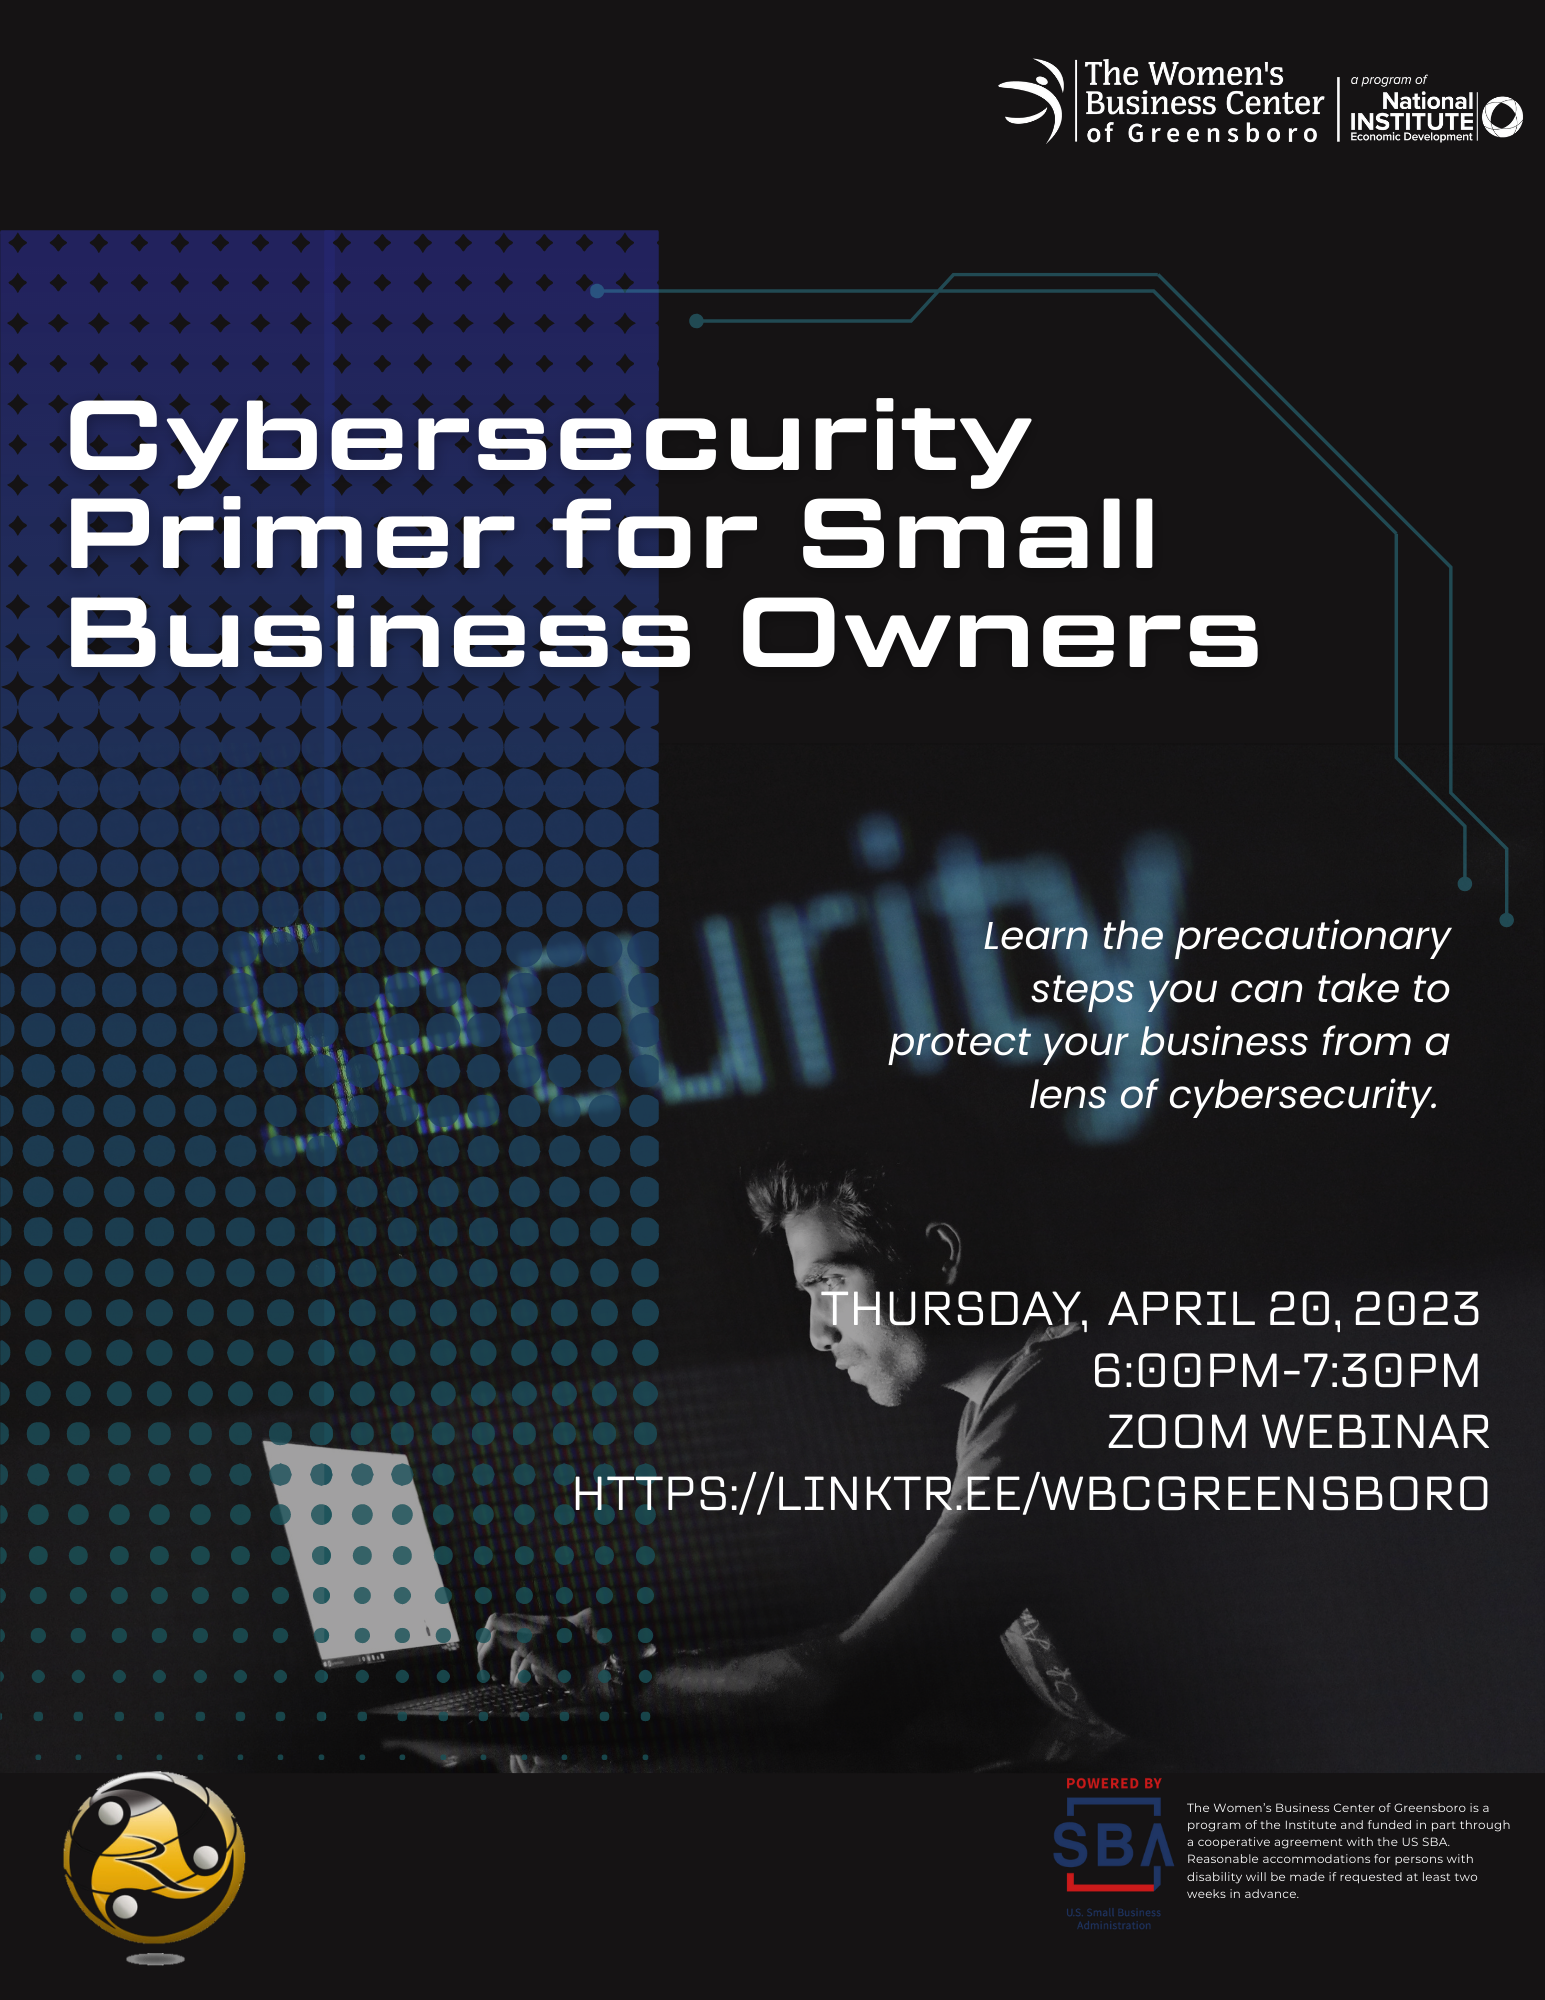 Cybersecurity Primer for Small Business Owners